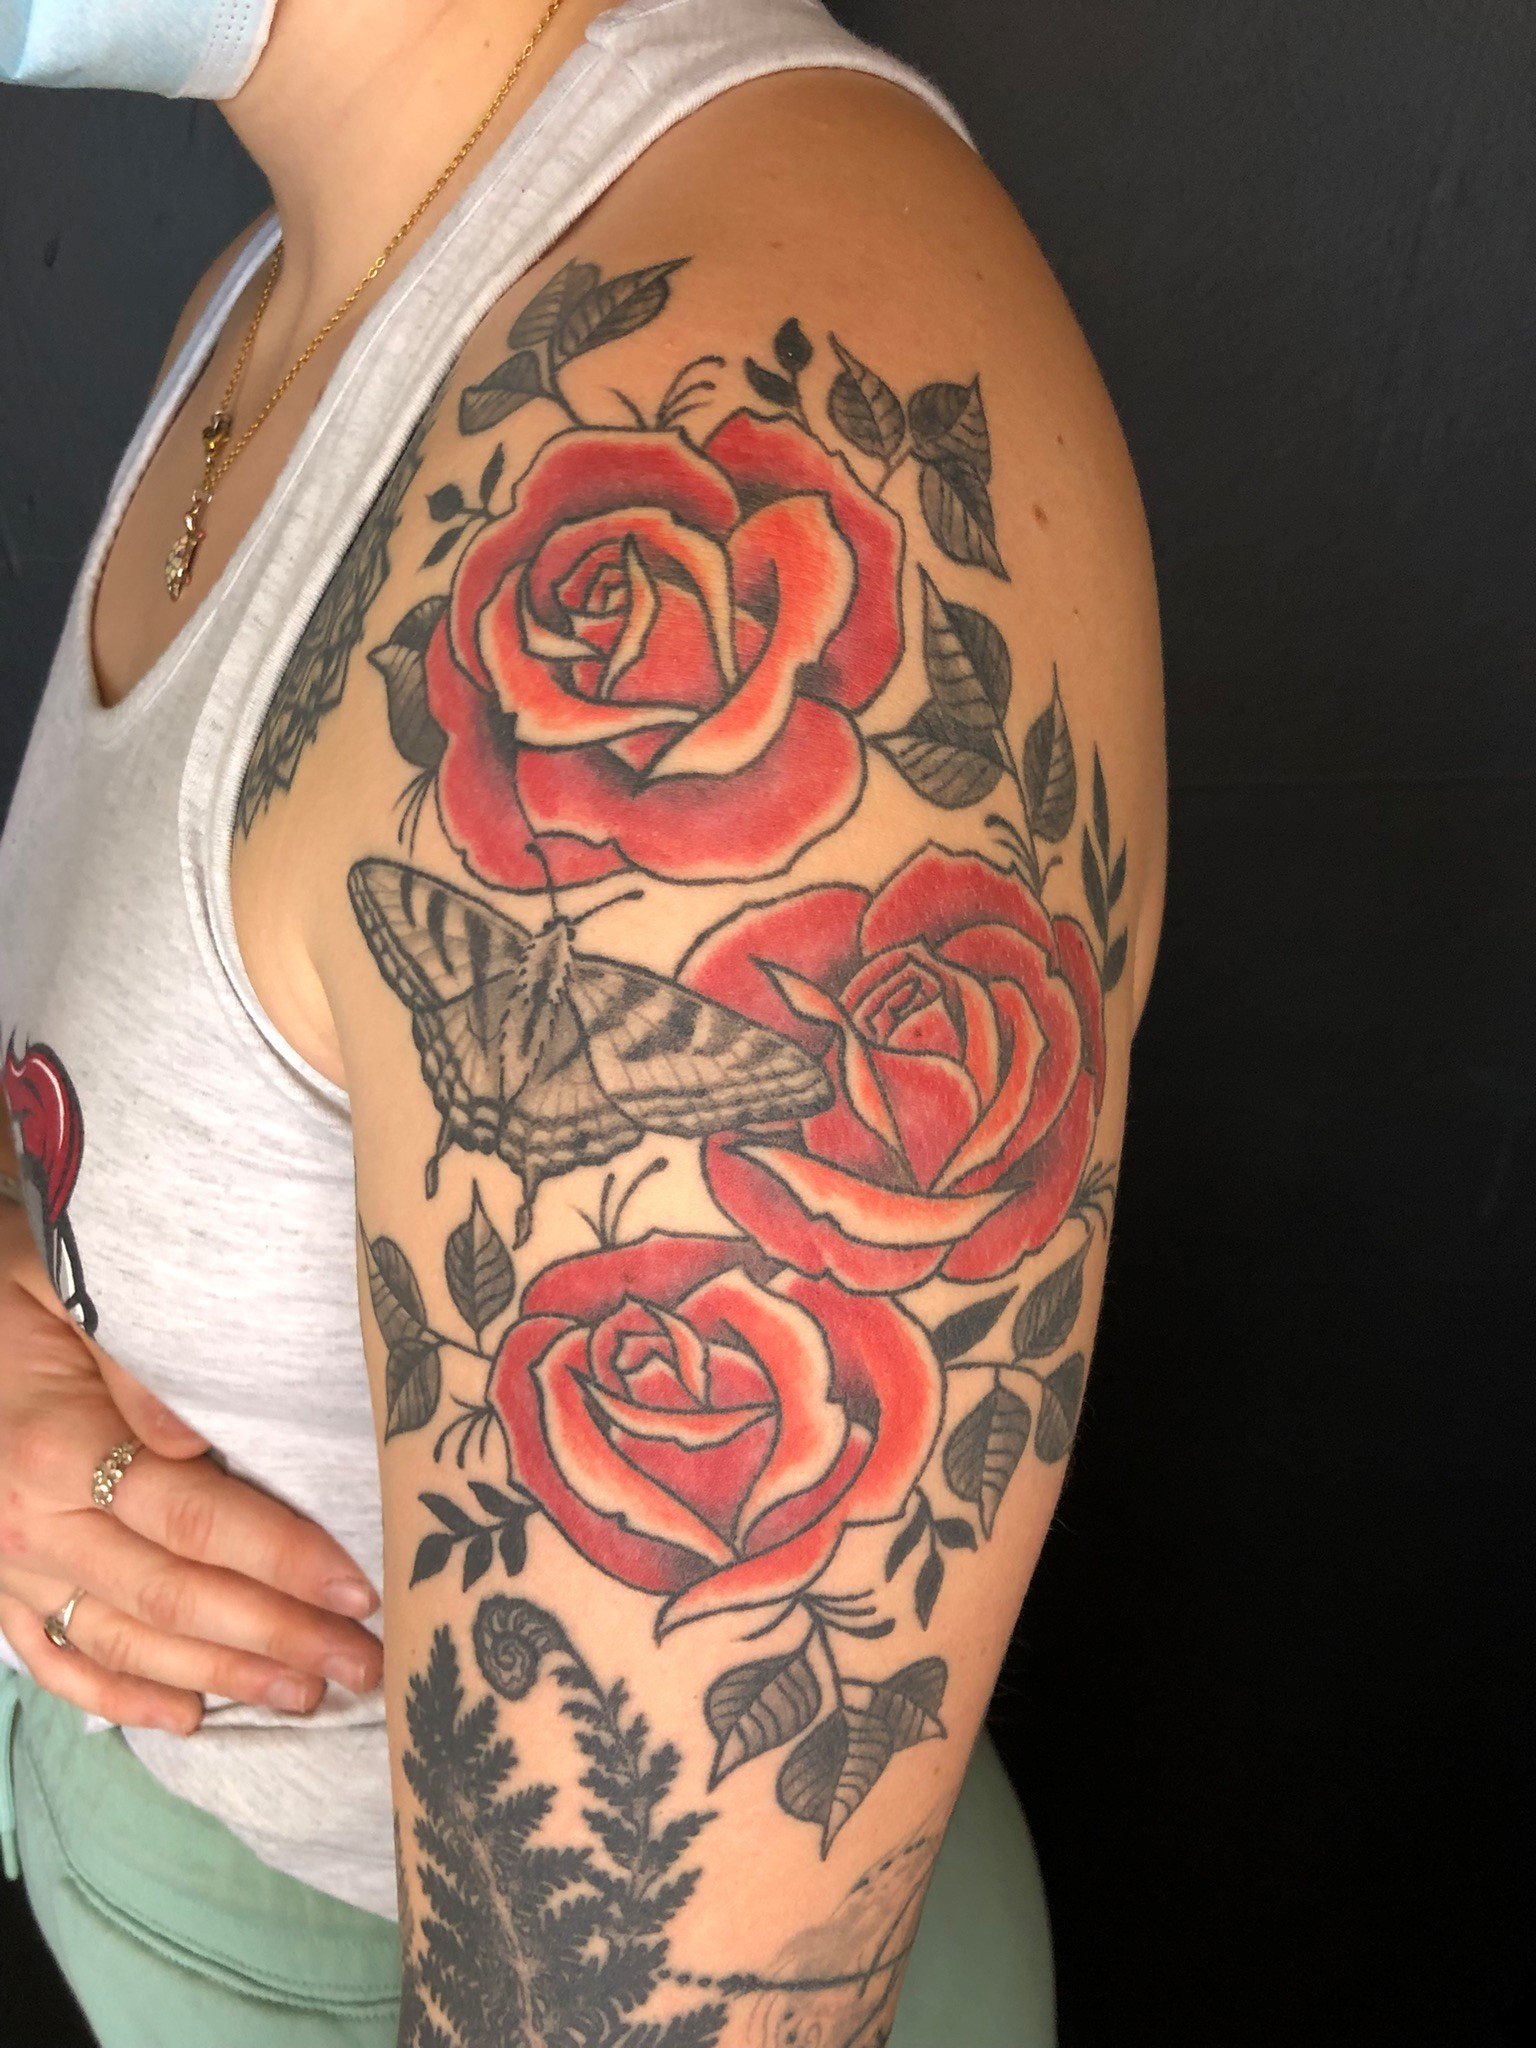 Roses and butterfly tattoo.jpg